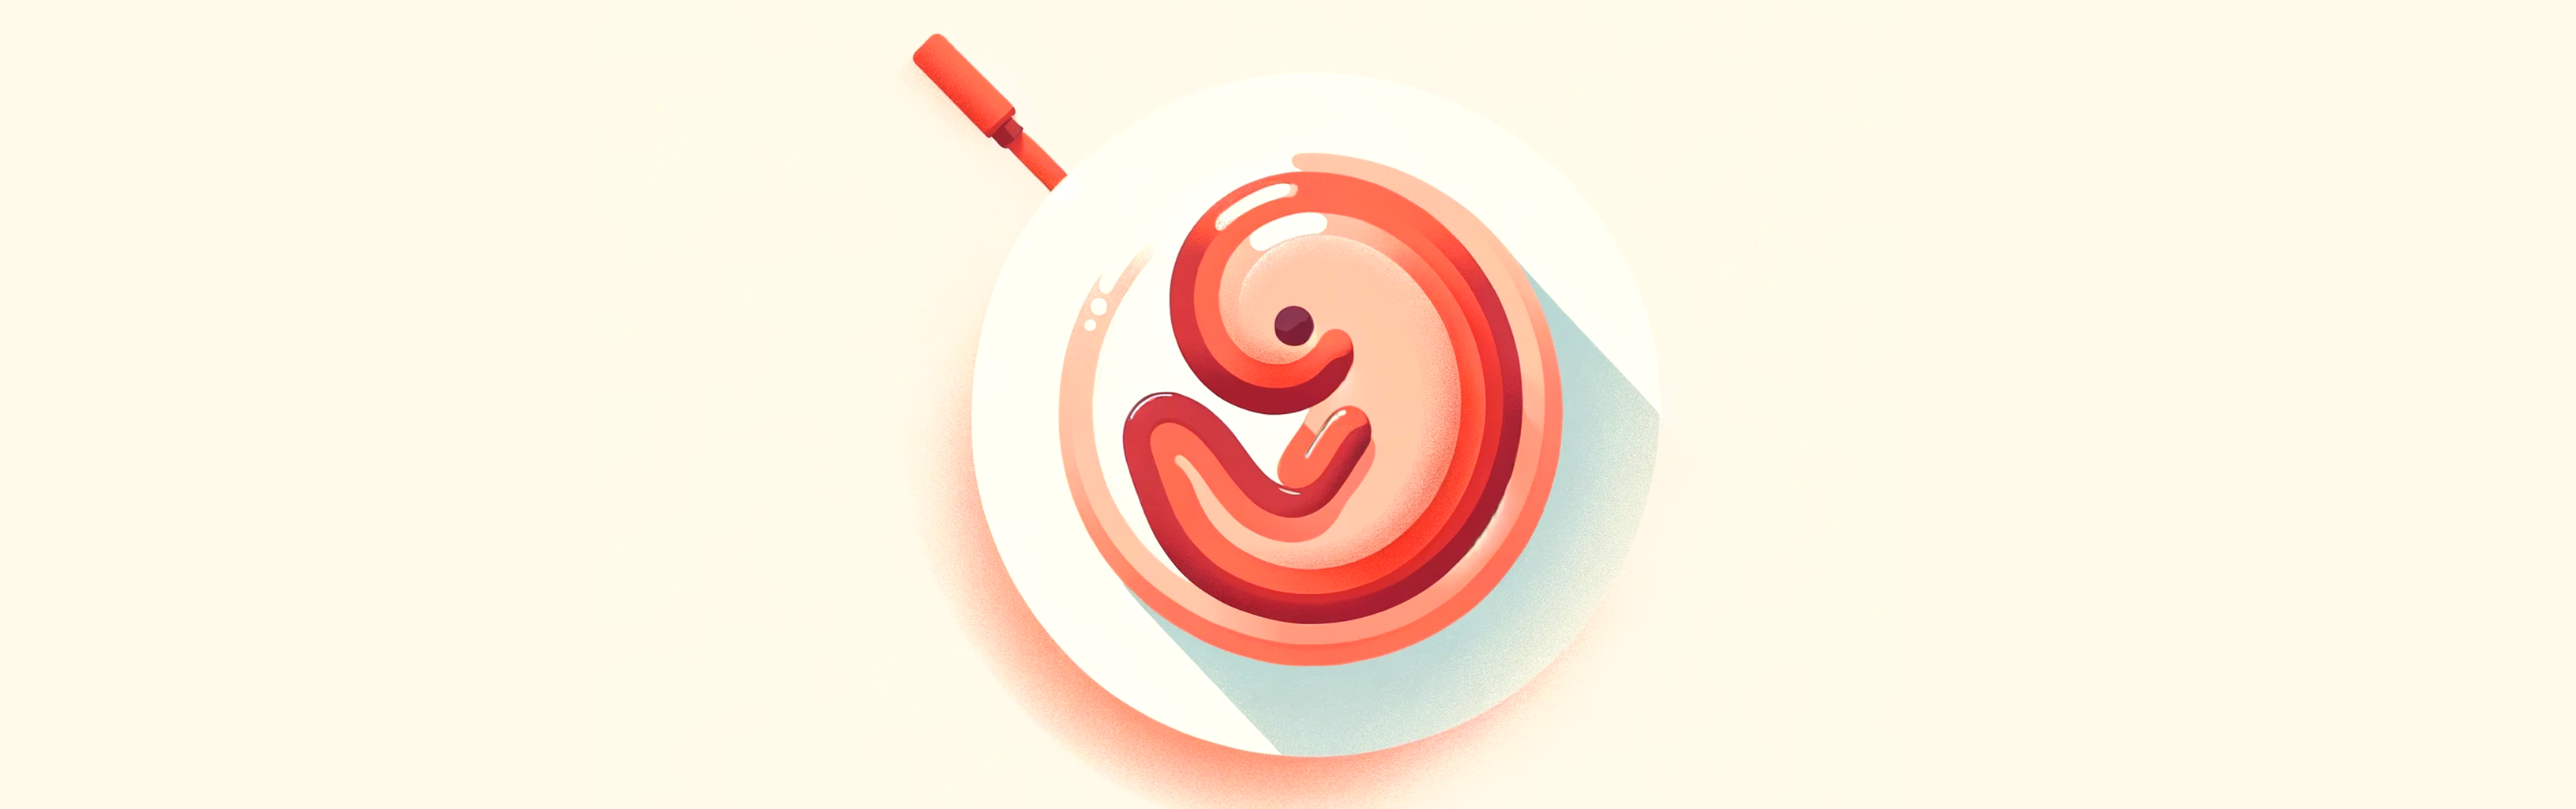 Minimalist flat design illustration of a 6-week fetus resembling a small tadpole next to a large yolk sac, representing an ultrasound image for a private early pregnancy scan at the specialist London Pregnancy Clinic, capturing the essence of a 6 weeks early pregnant ultrasound scan.